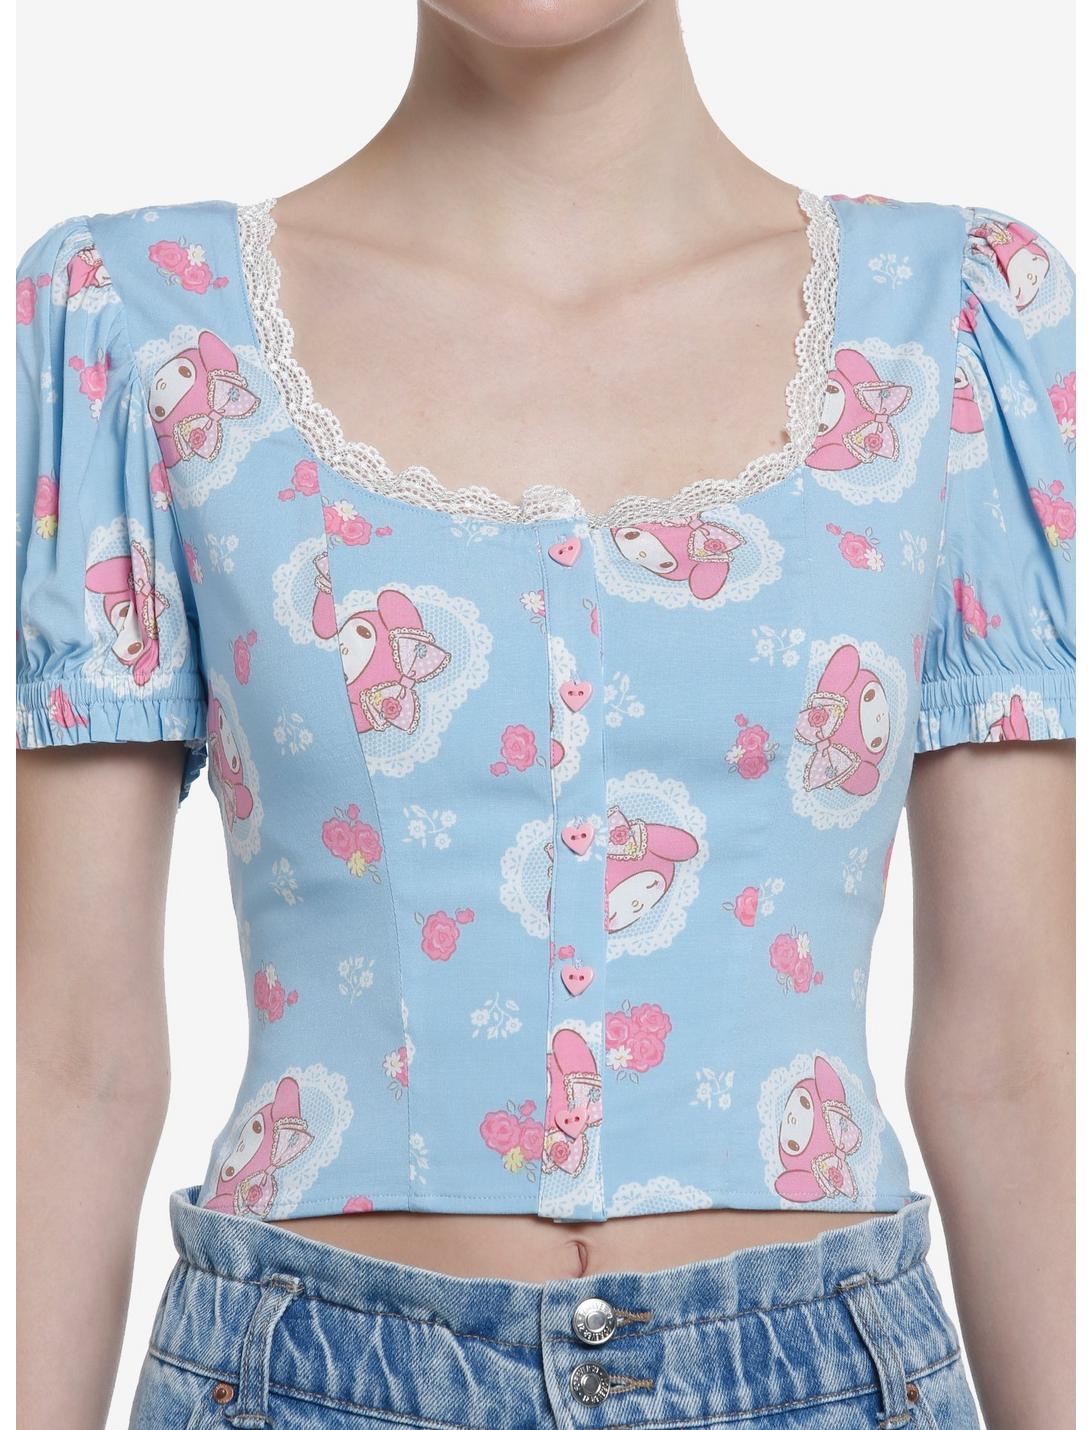 My Melody Lace Peasant Girls Woven Top, MULTI, hi-res